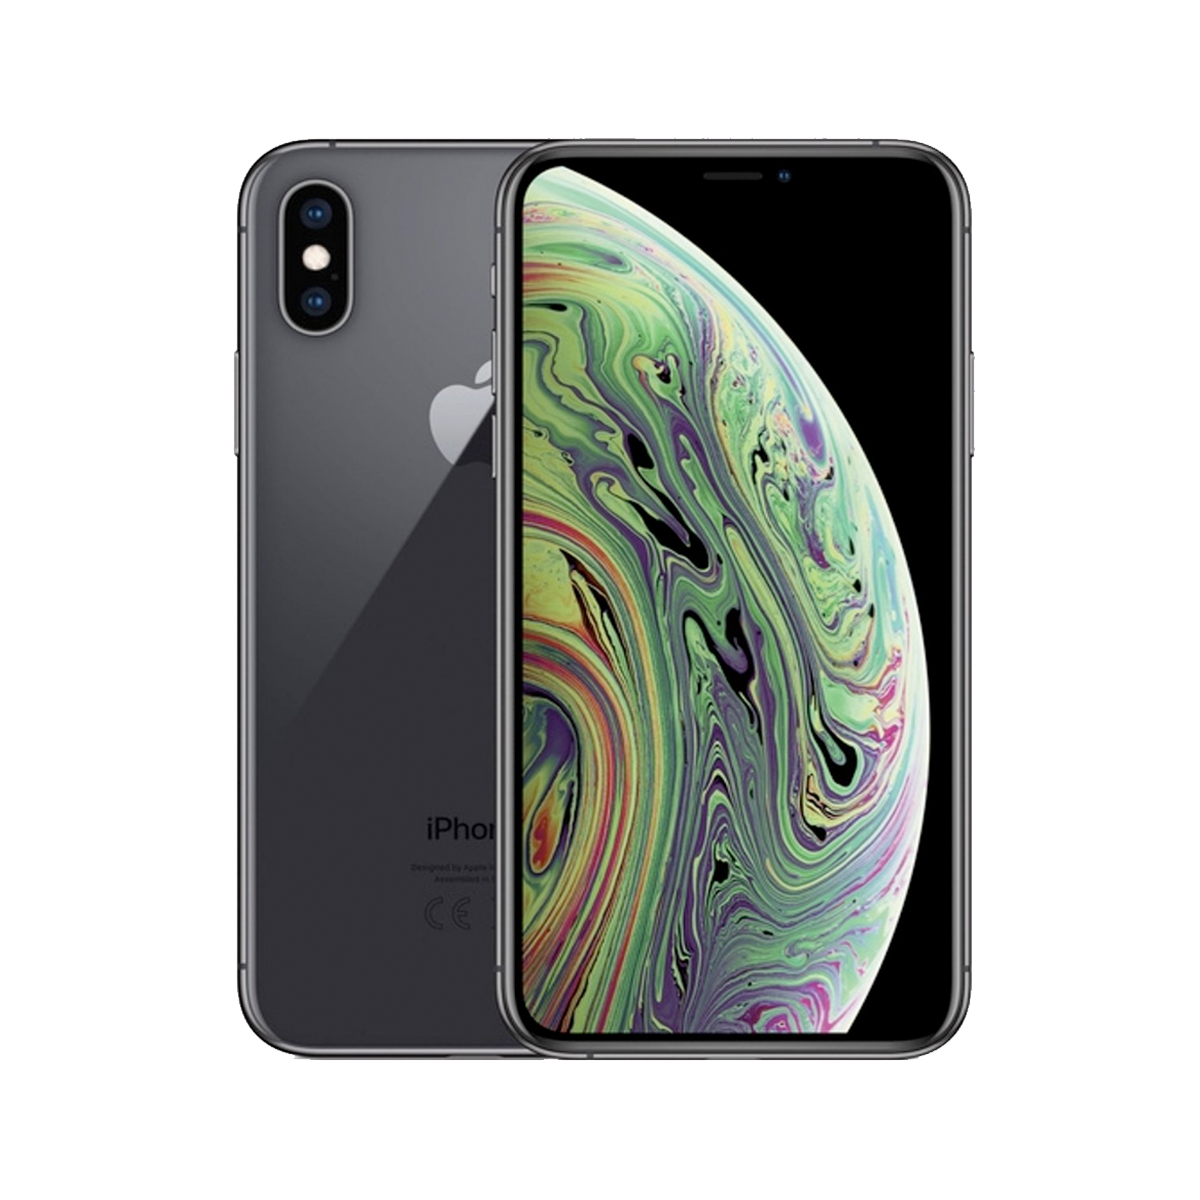 Apple iPhone XS Max 64GB - Space Gray